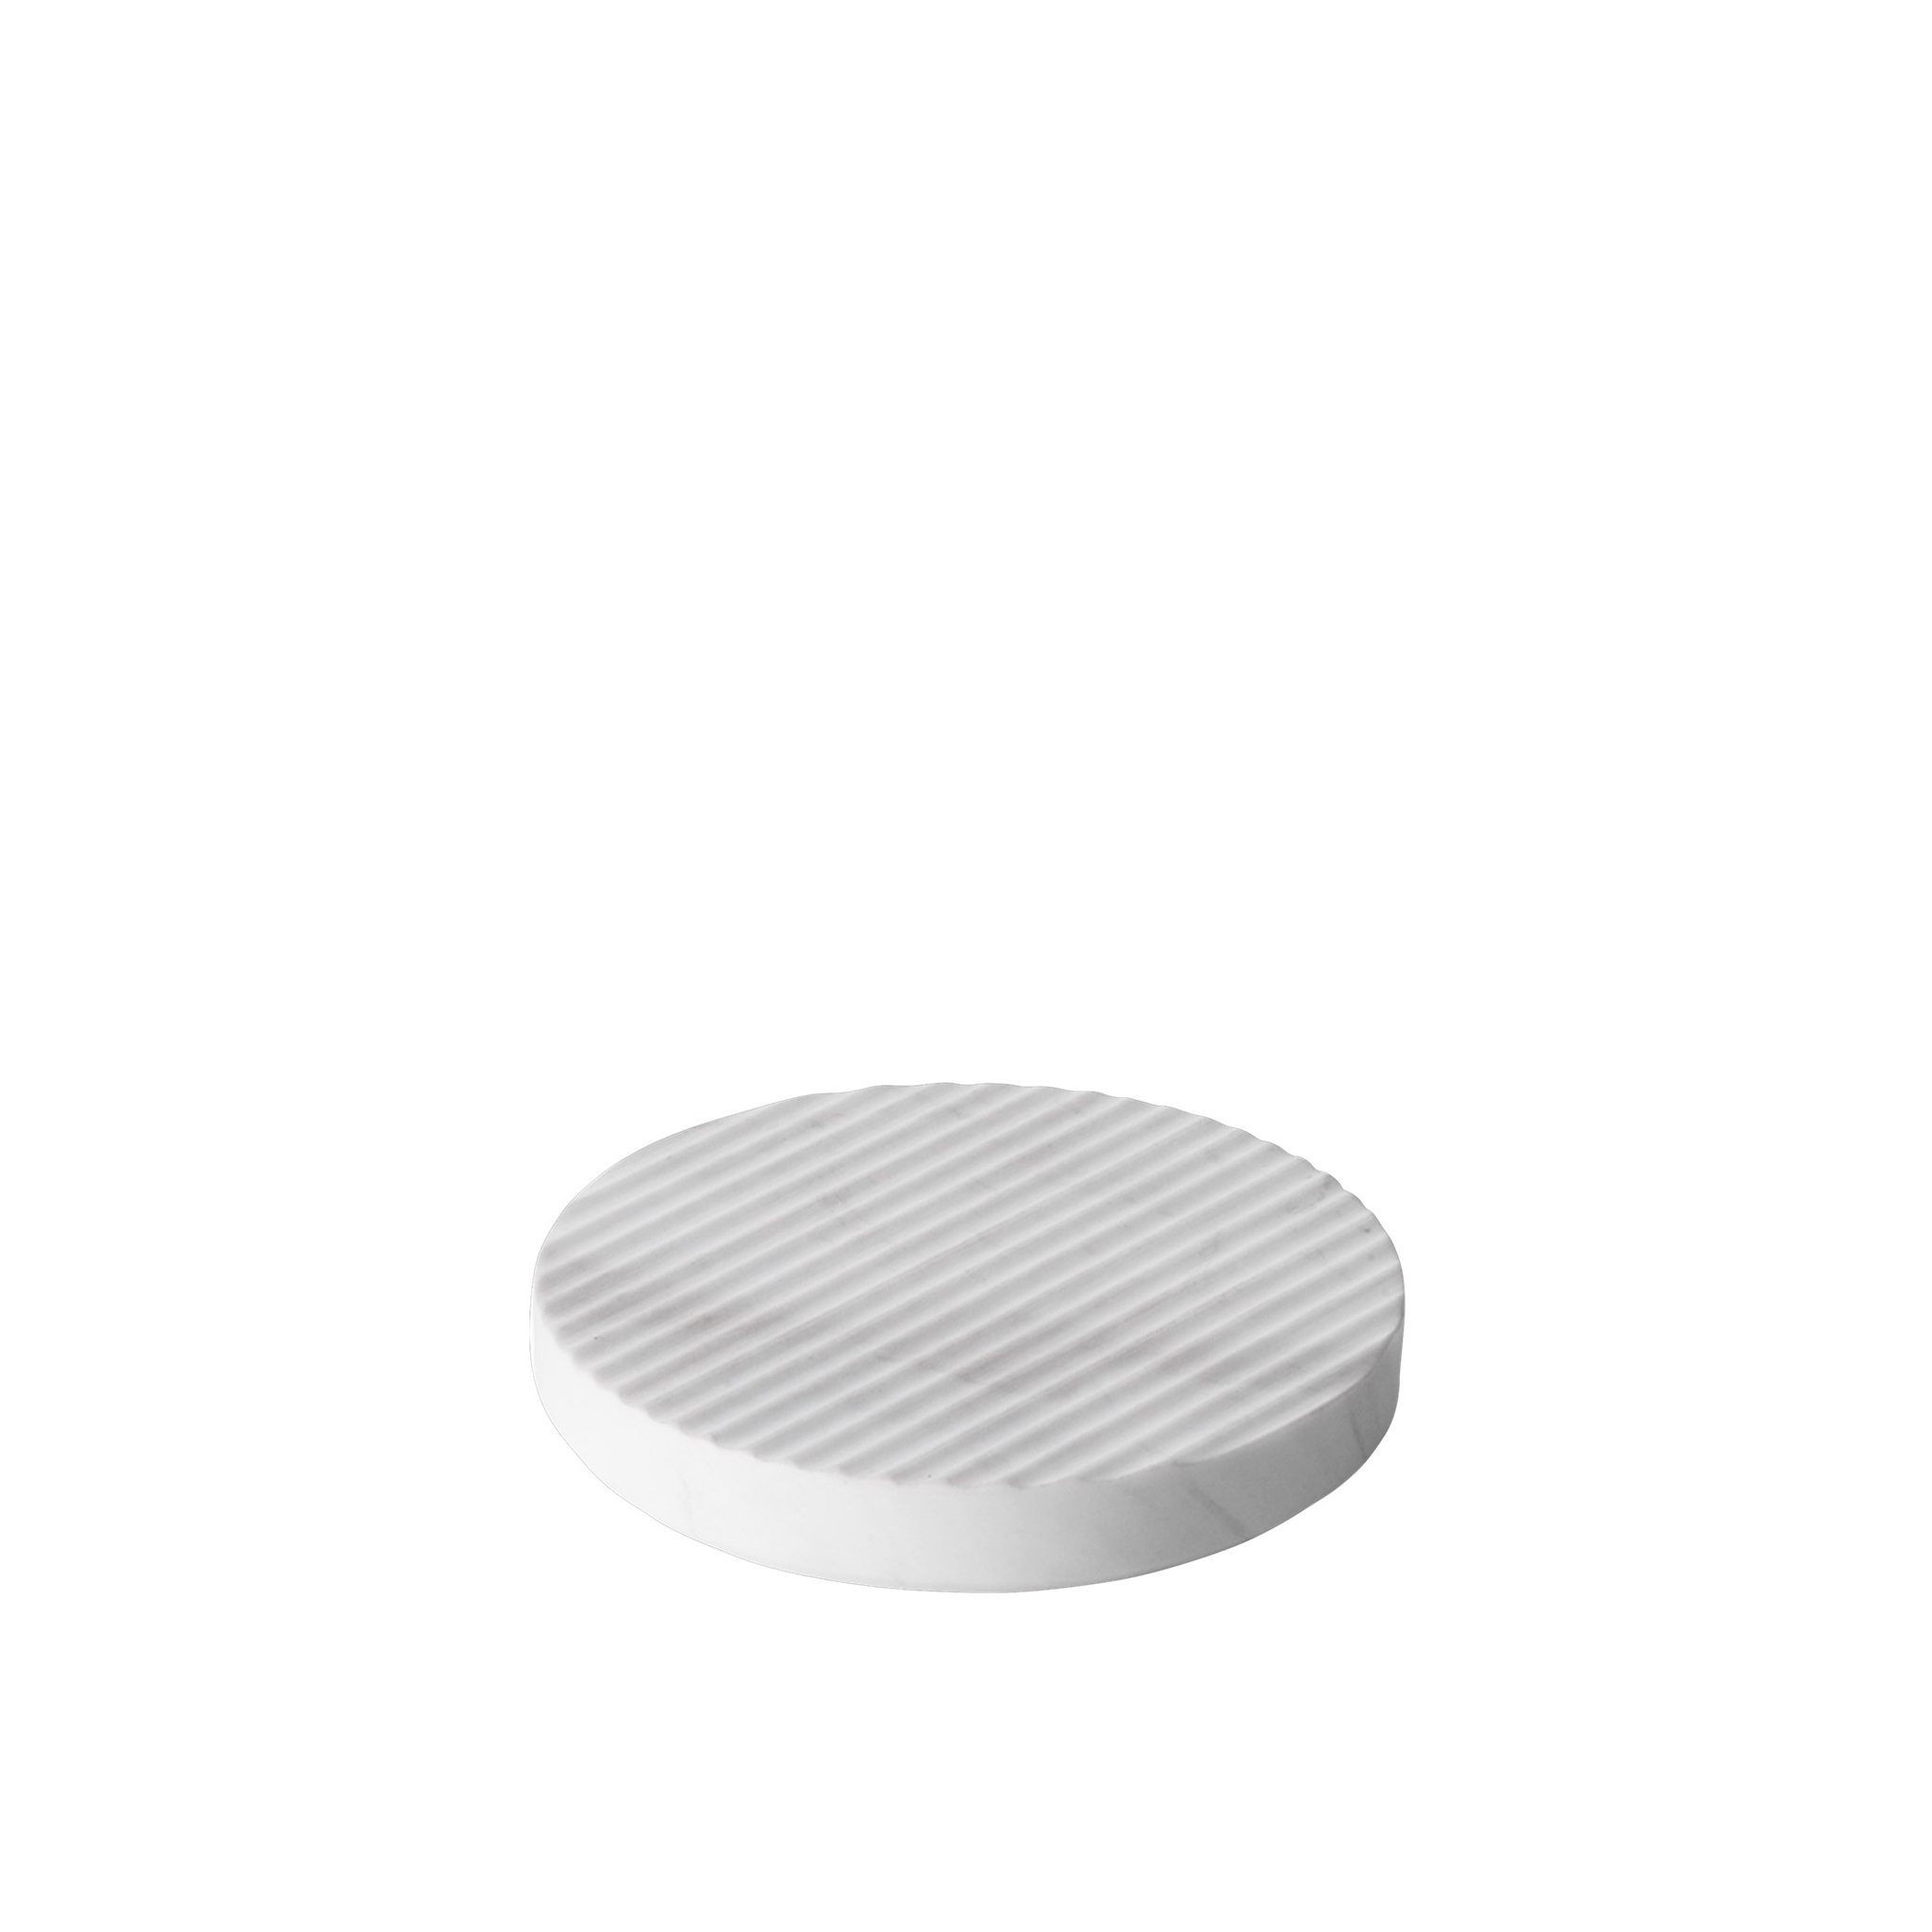 Groove Trivets by Muuto